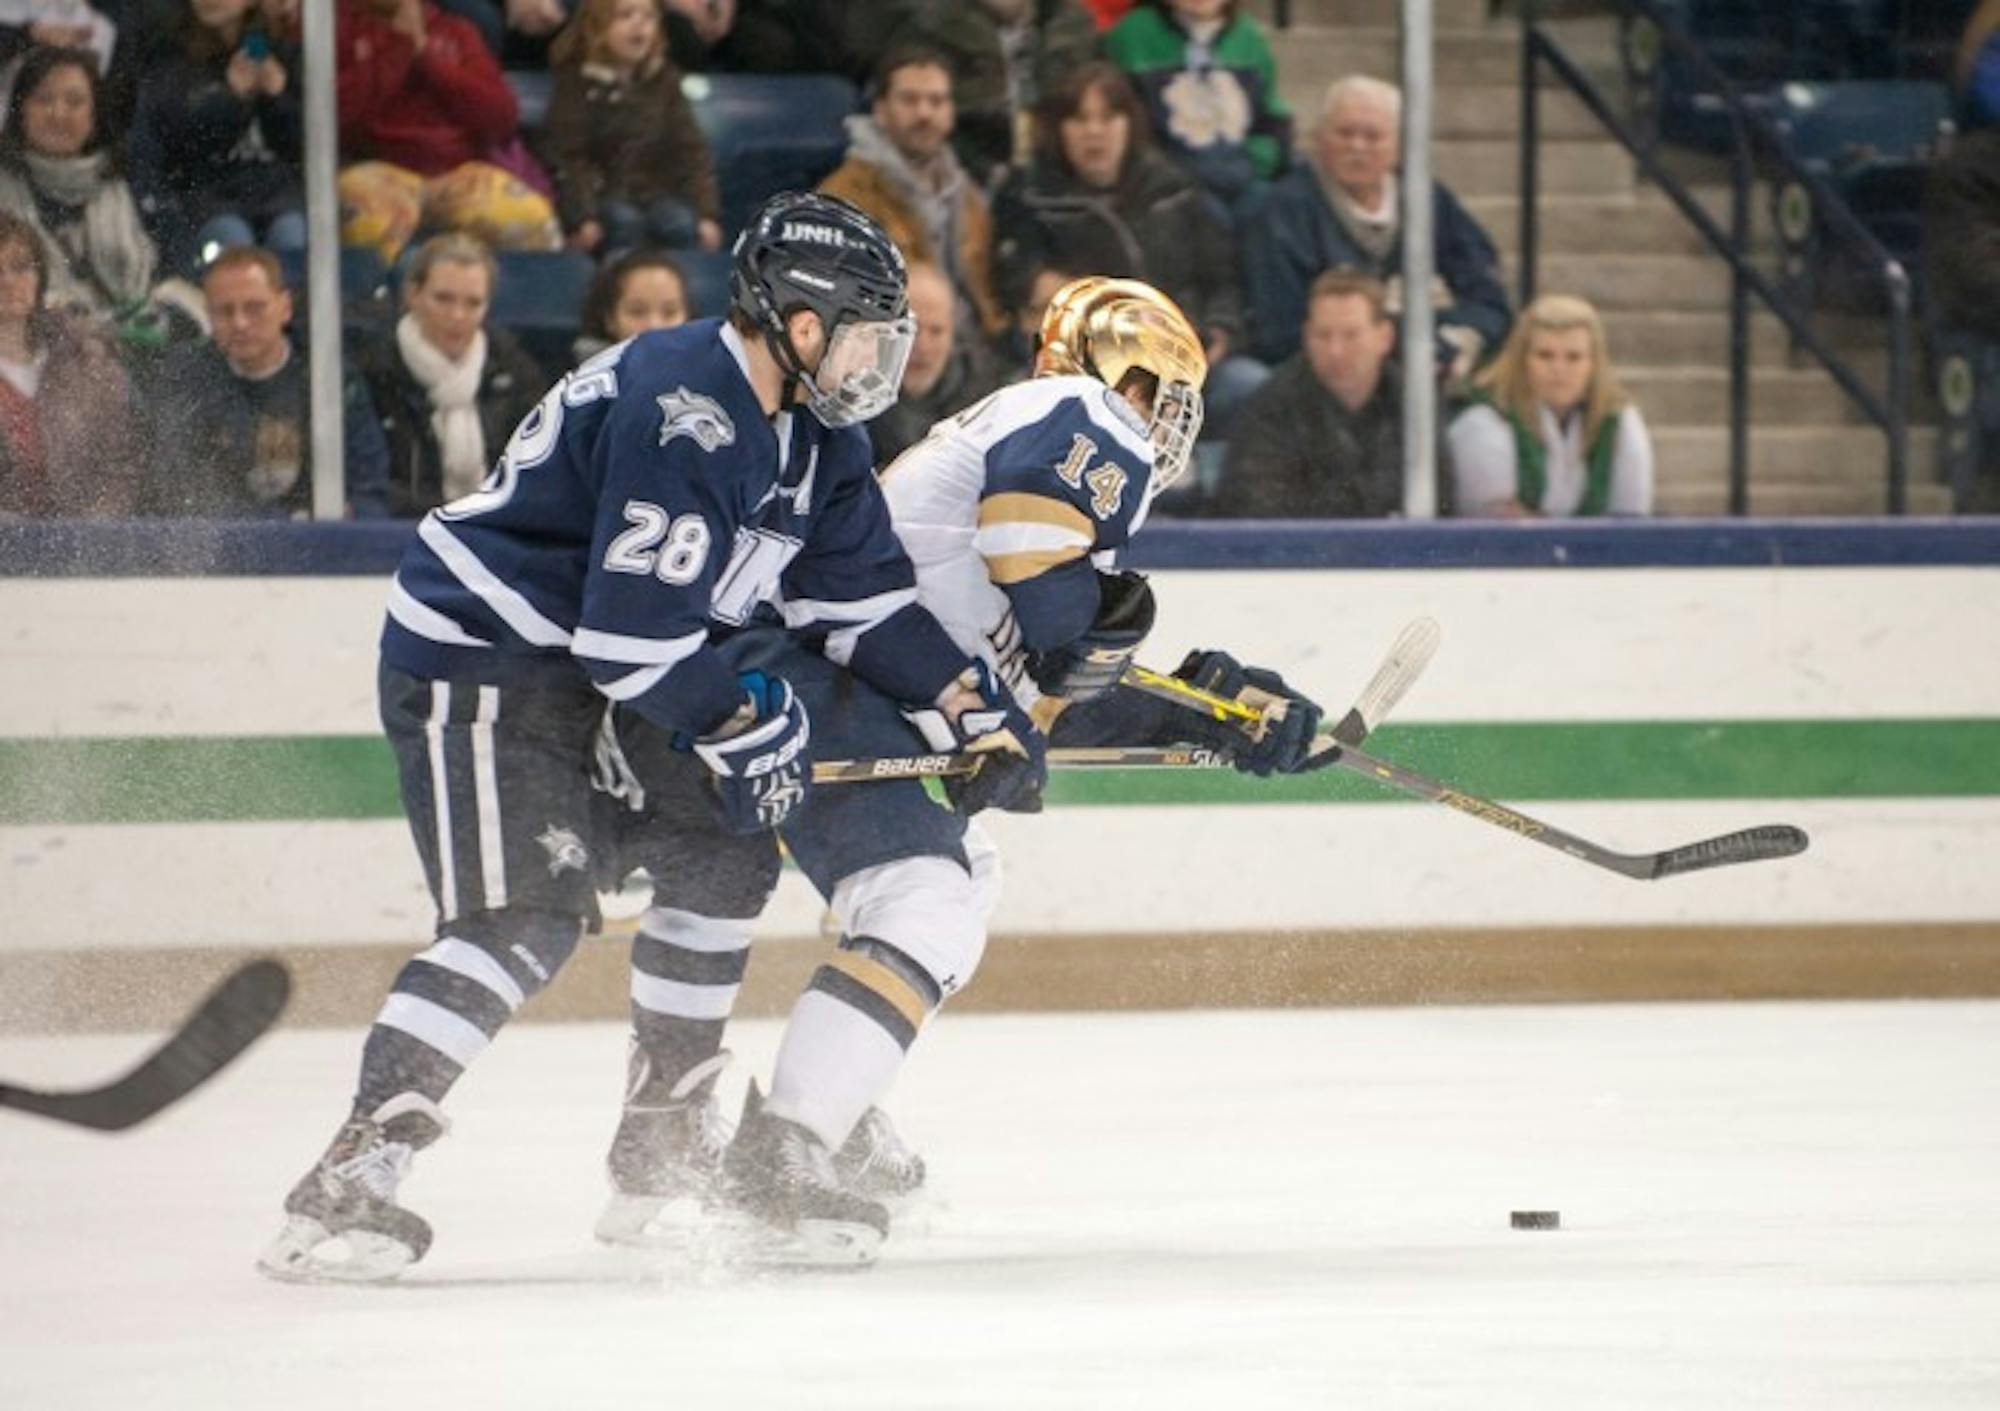 Senior center Thomas DiPauli battles with a New Hampshire defender during a 5-2 defeat at Compton Family Ice Arena on Jan. 30. DiPauli scored during the team’s 3-3 tie with Minnesota Duluth on Saturday.